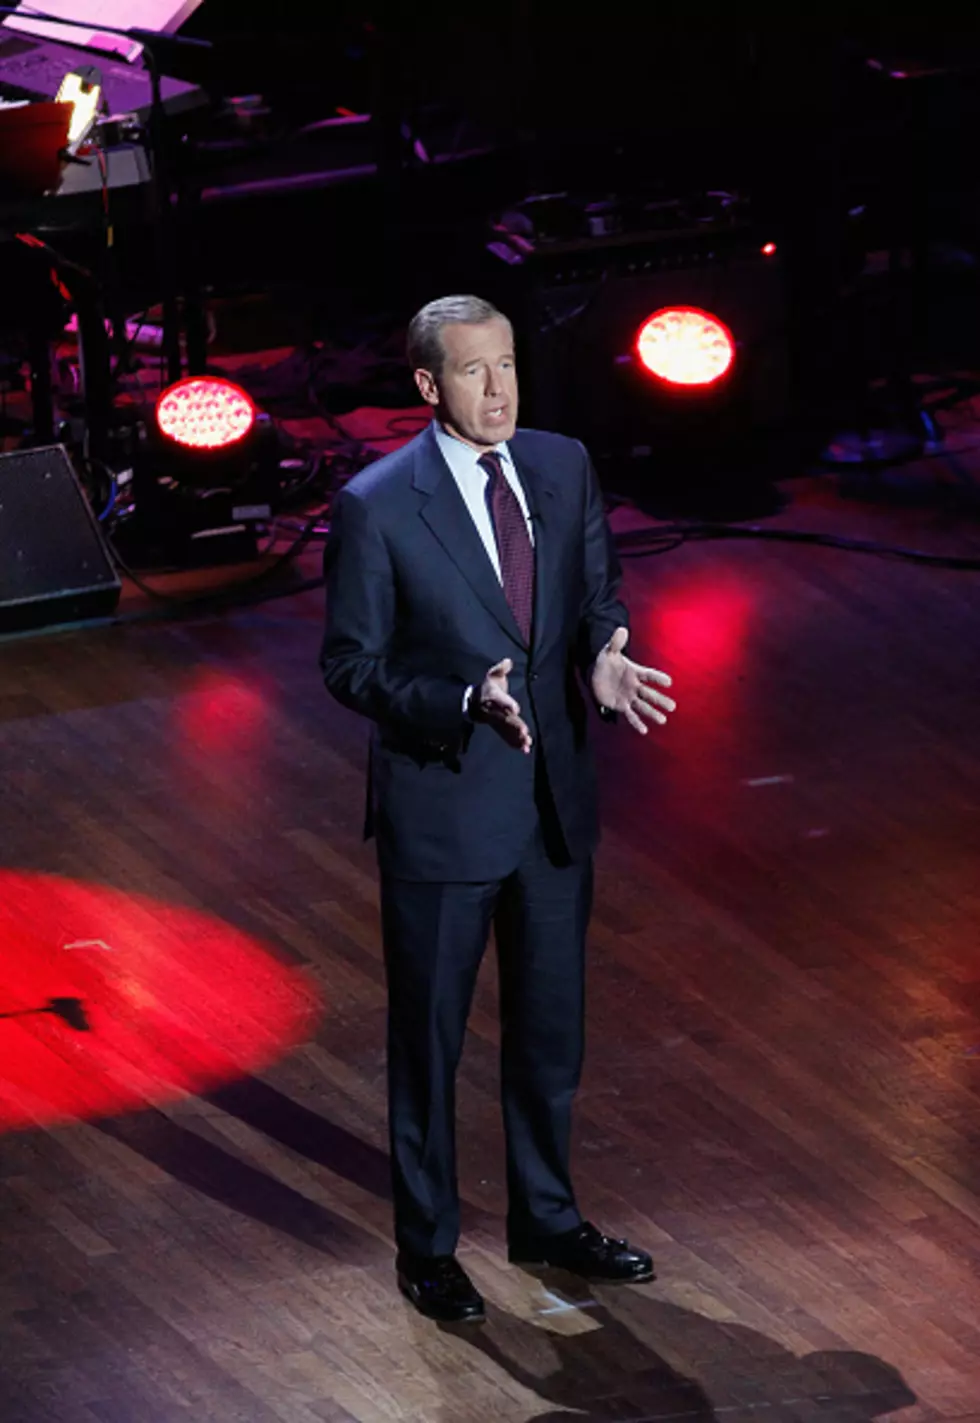 NBC’s Brian Williams Temporarily Steps Down From ‘Nightly News’ [Videos]